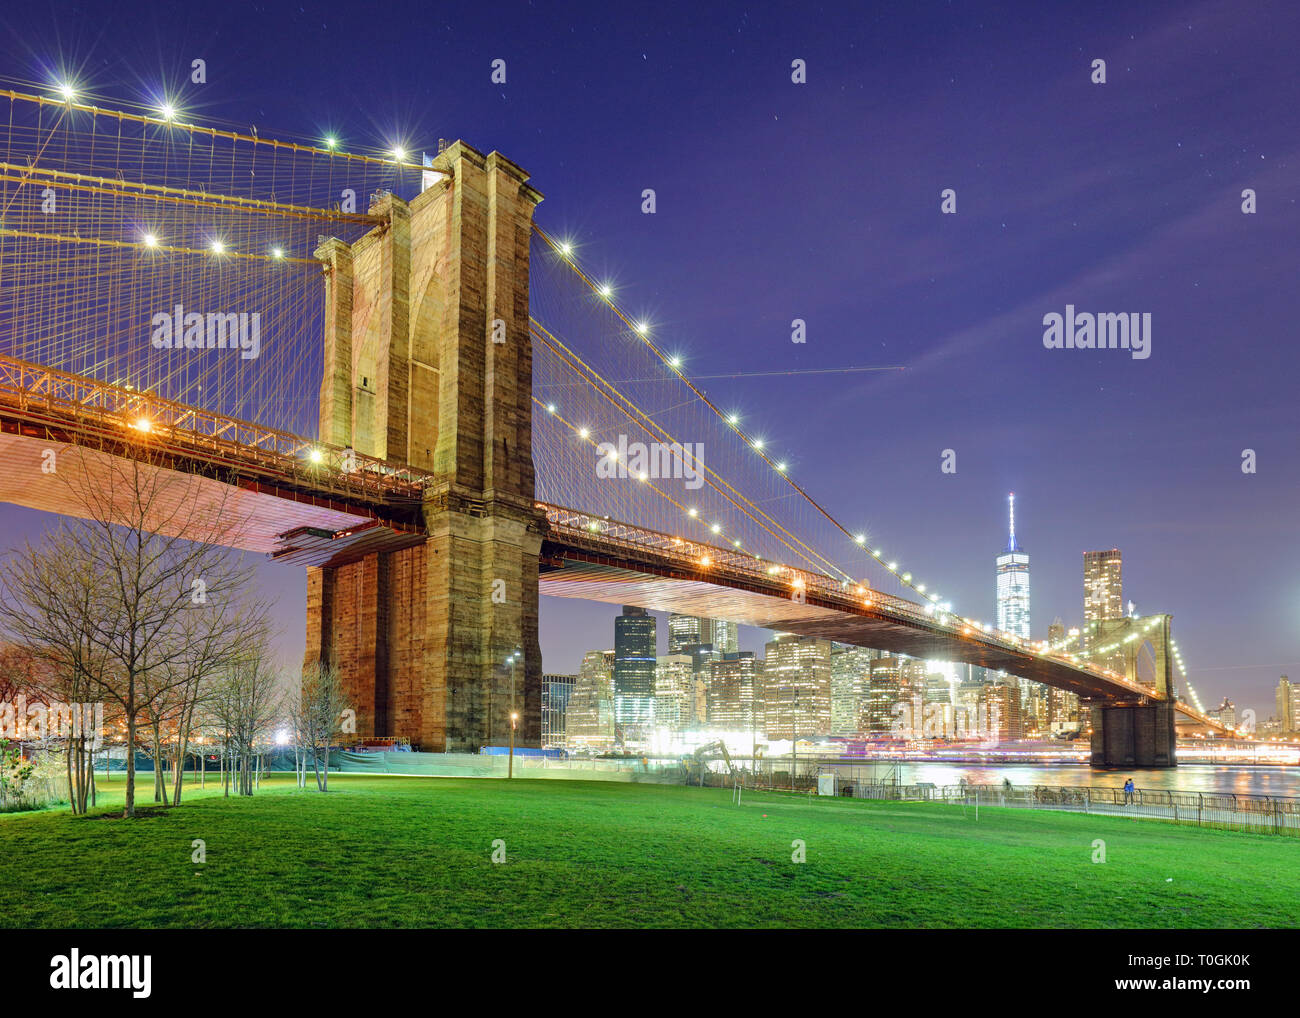 Brooklyn Bridge over East River at night in New York City Manhattan with green park Stock Photo